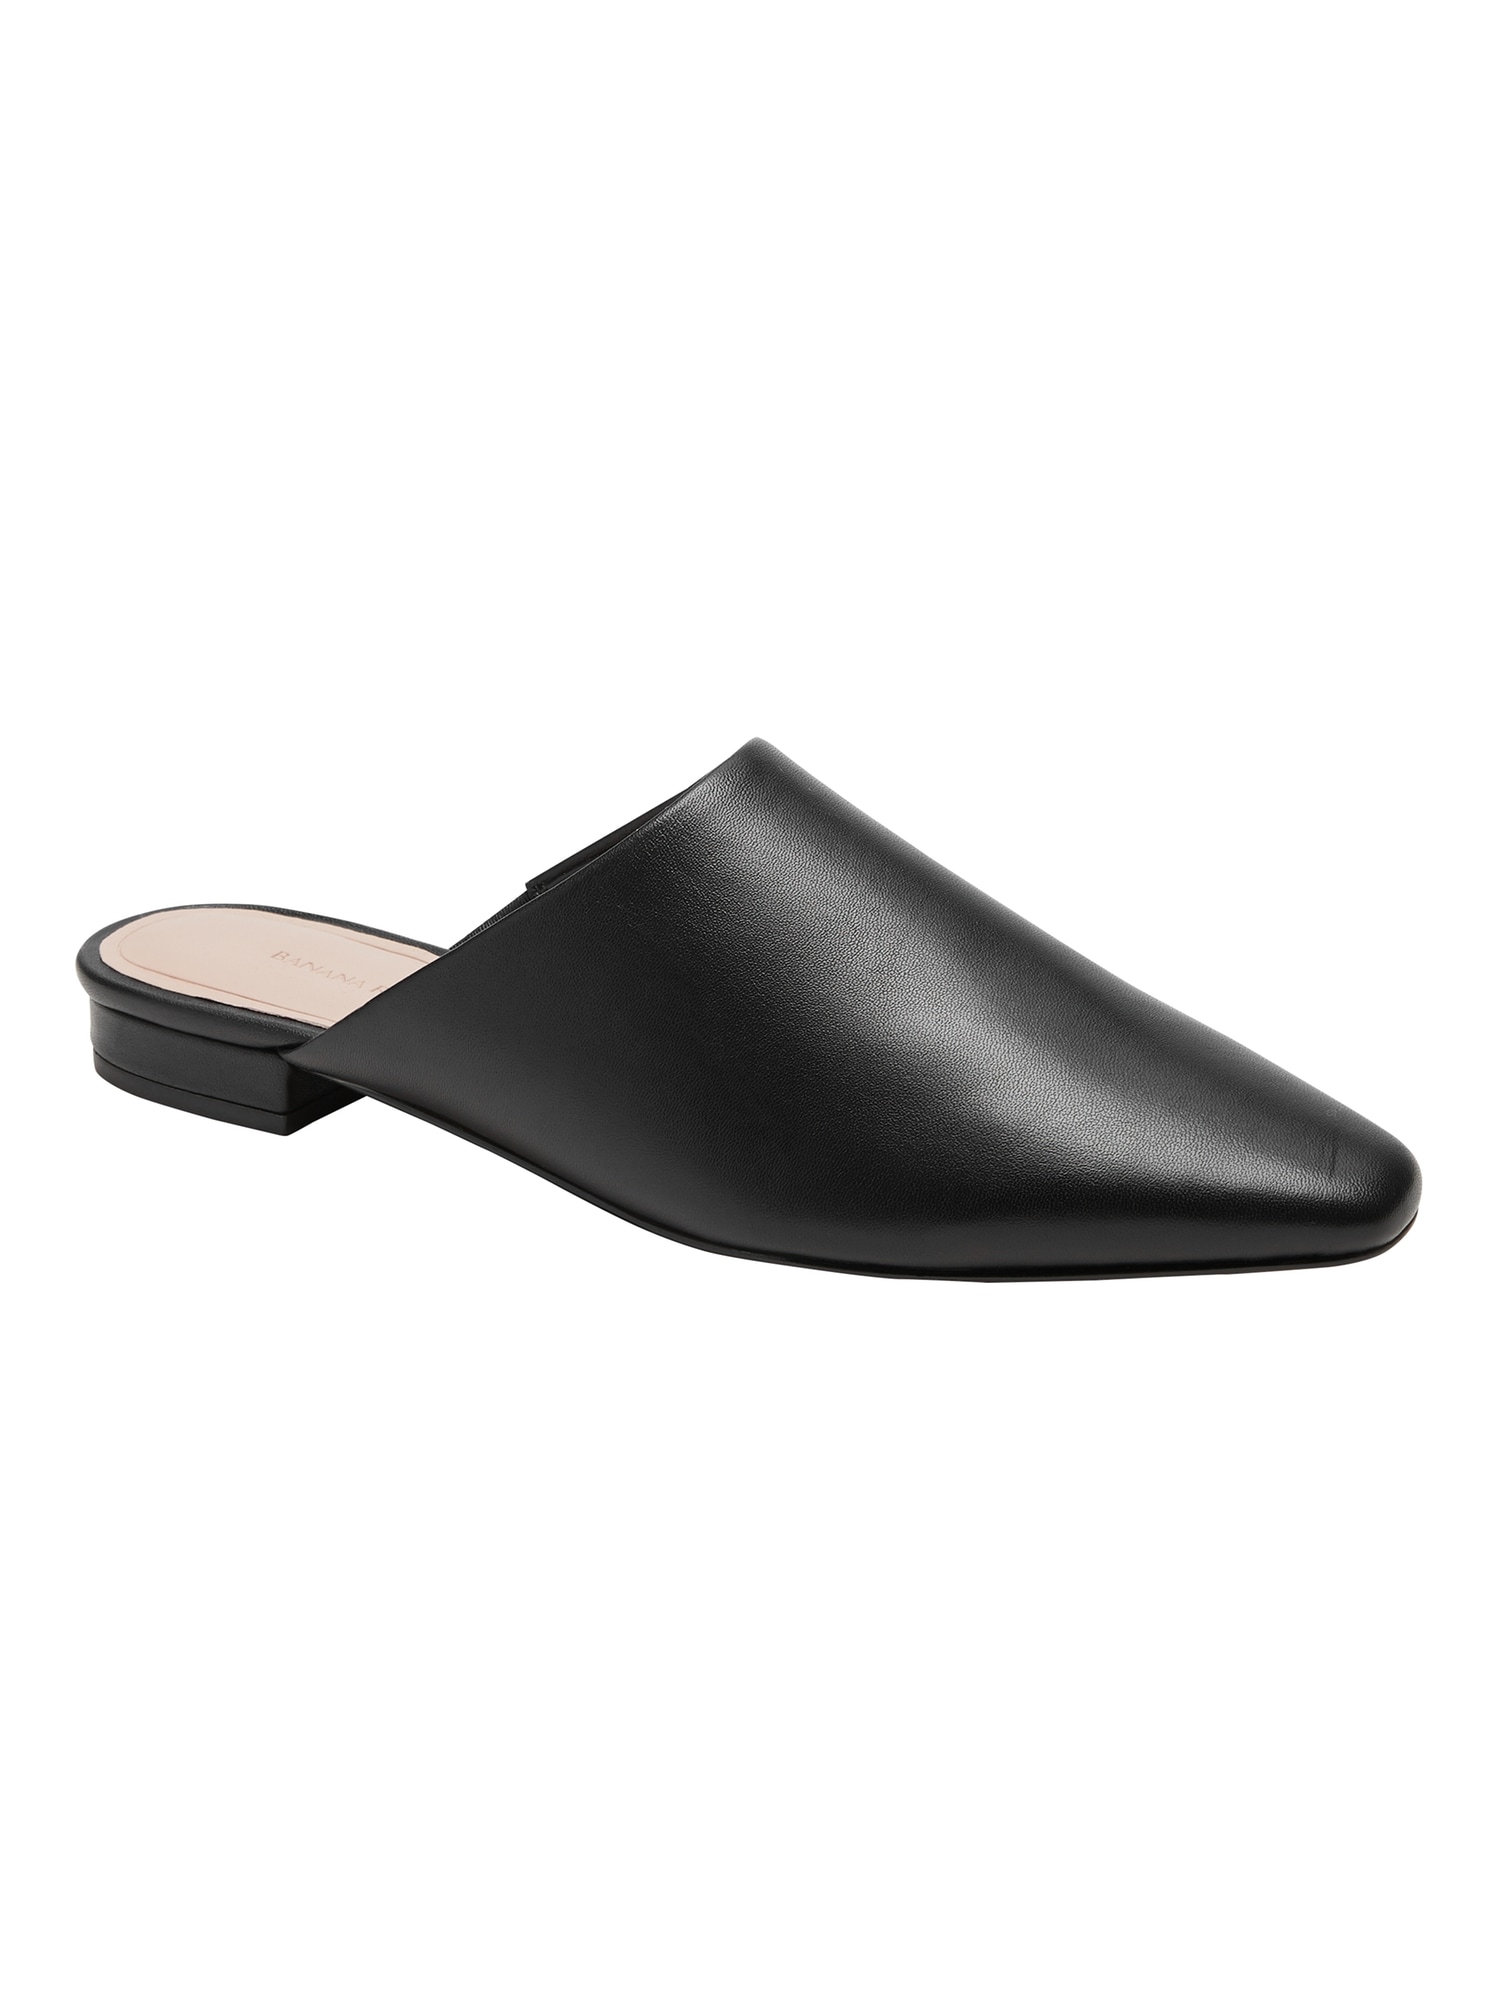 Leather Pointy-Toe Flat Mule